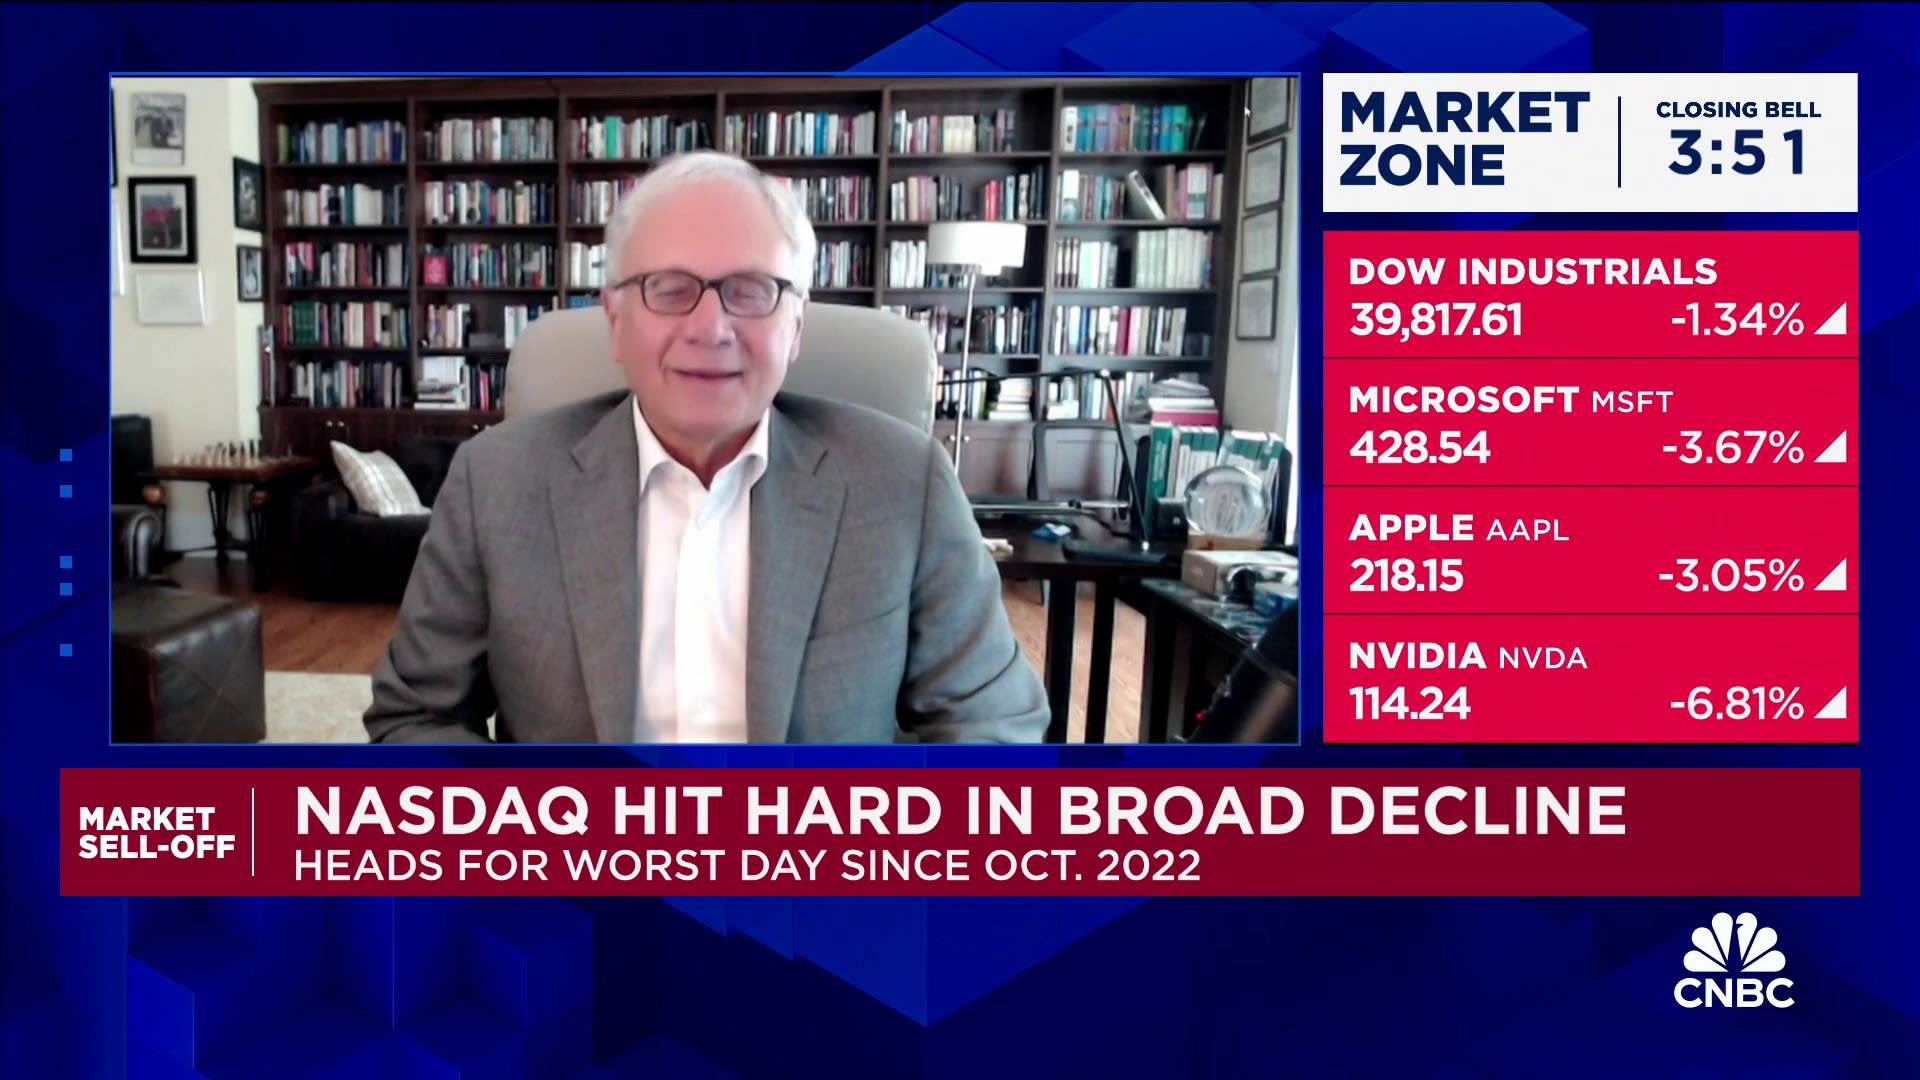 This sell-off is just a market correction of the ‘Magnificent 7’, says Ed Yardeni [Video]